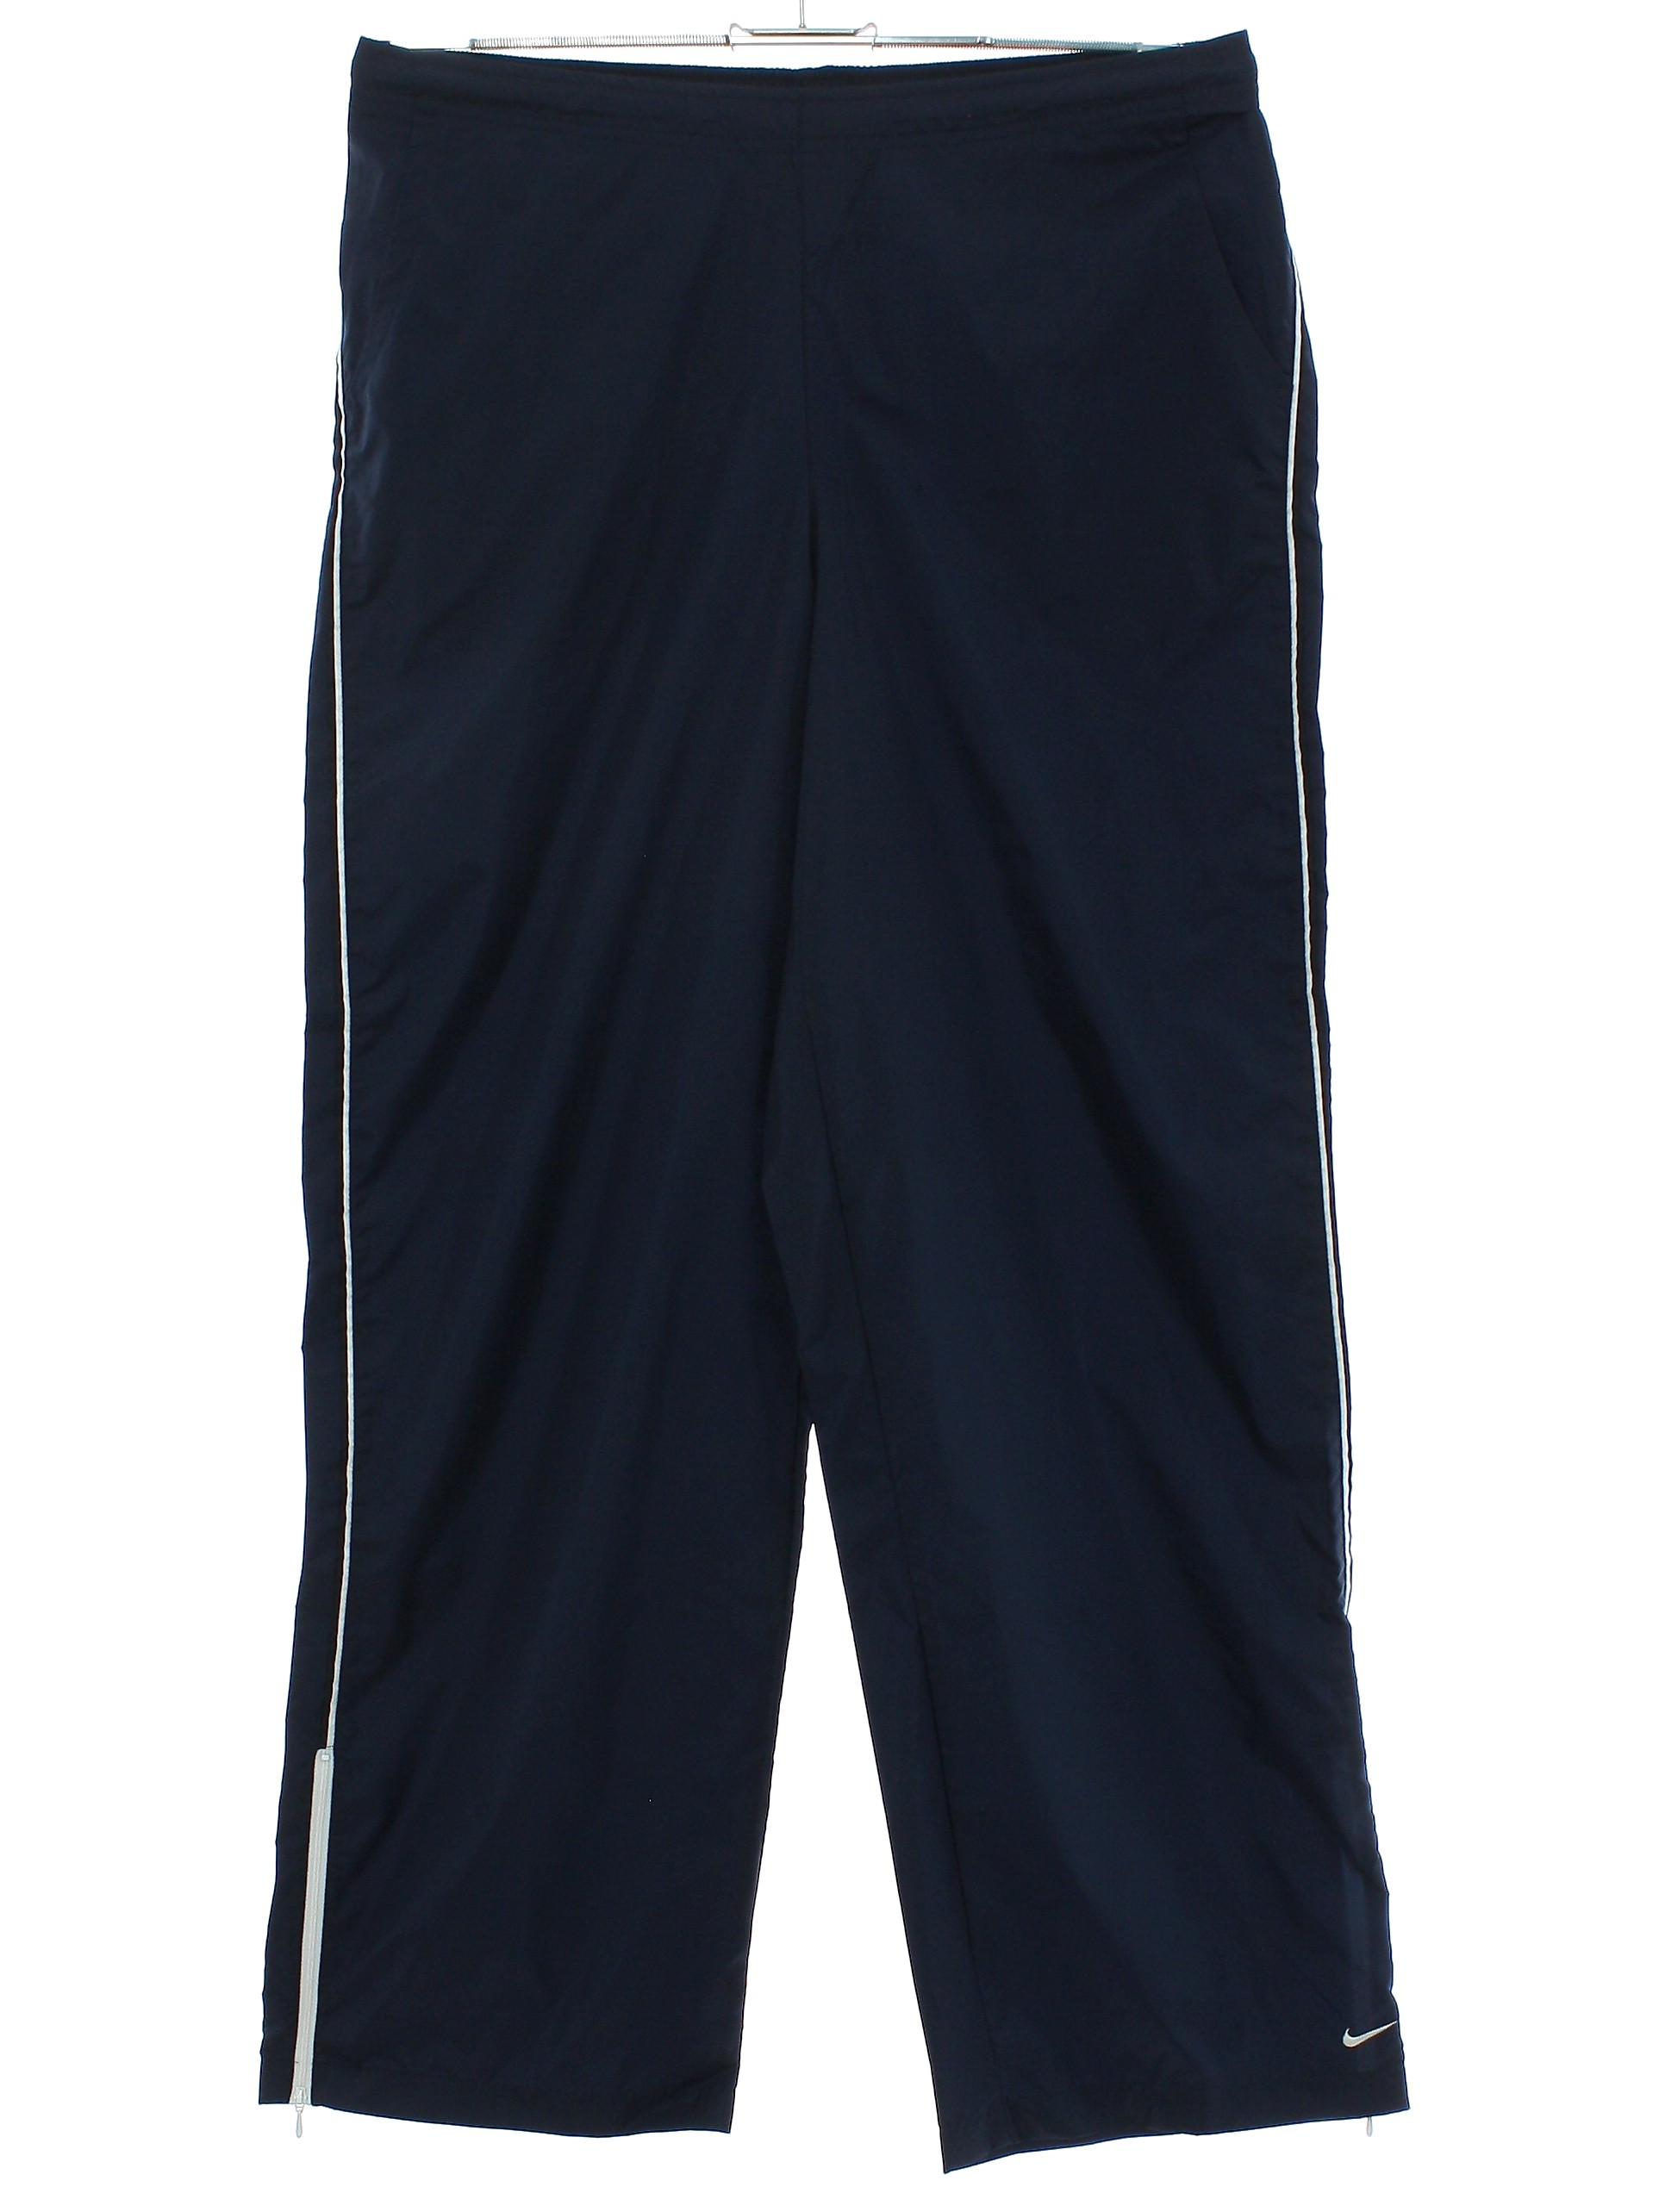 Pants: 90s (early 2000s) -Nike- Mens navy blue and white nylon